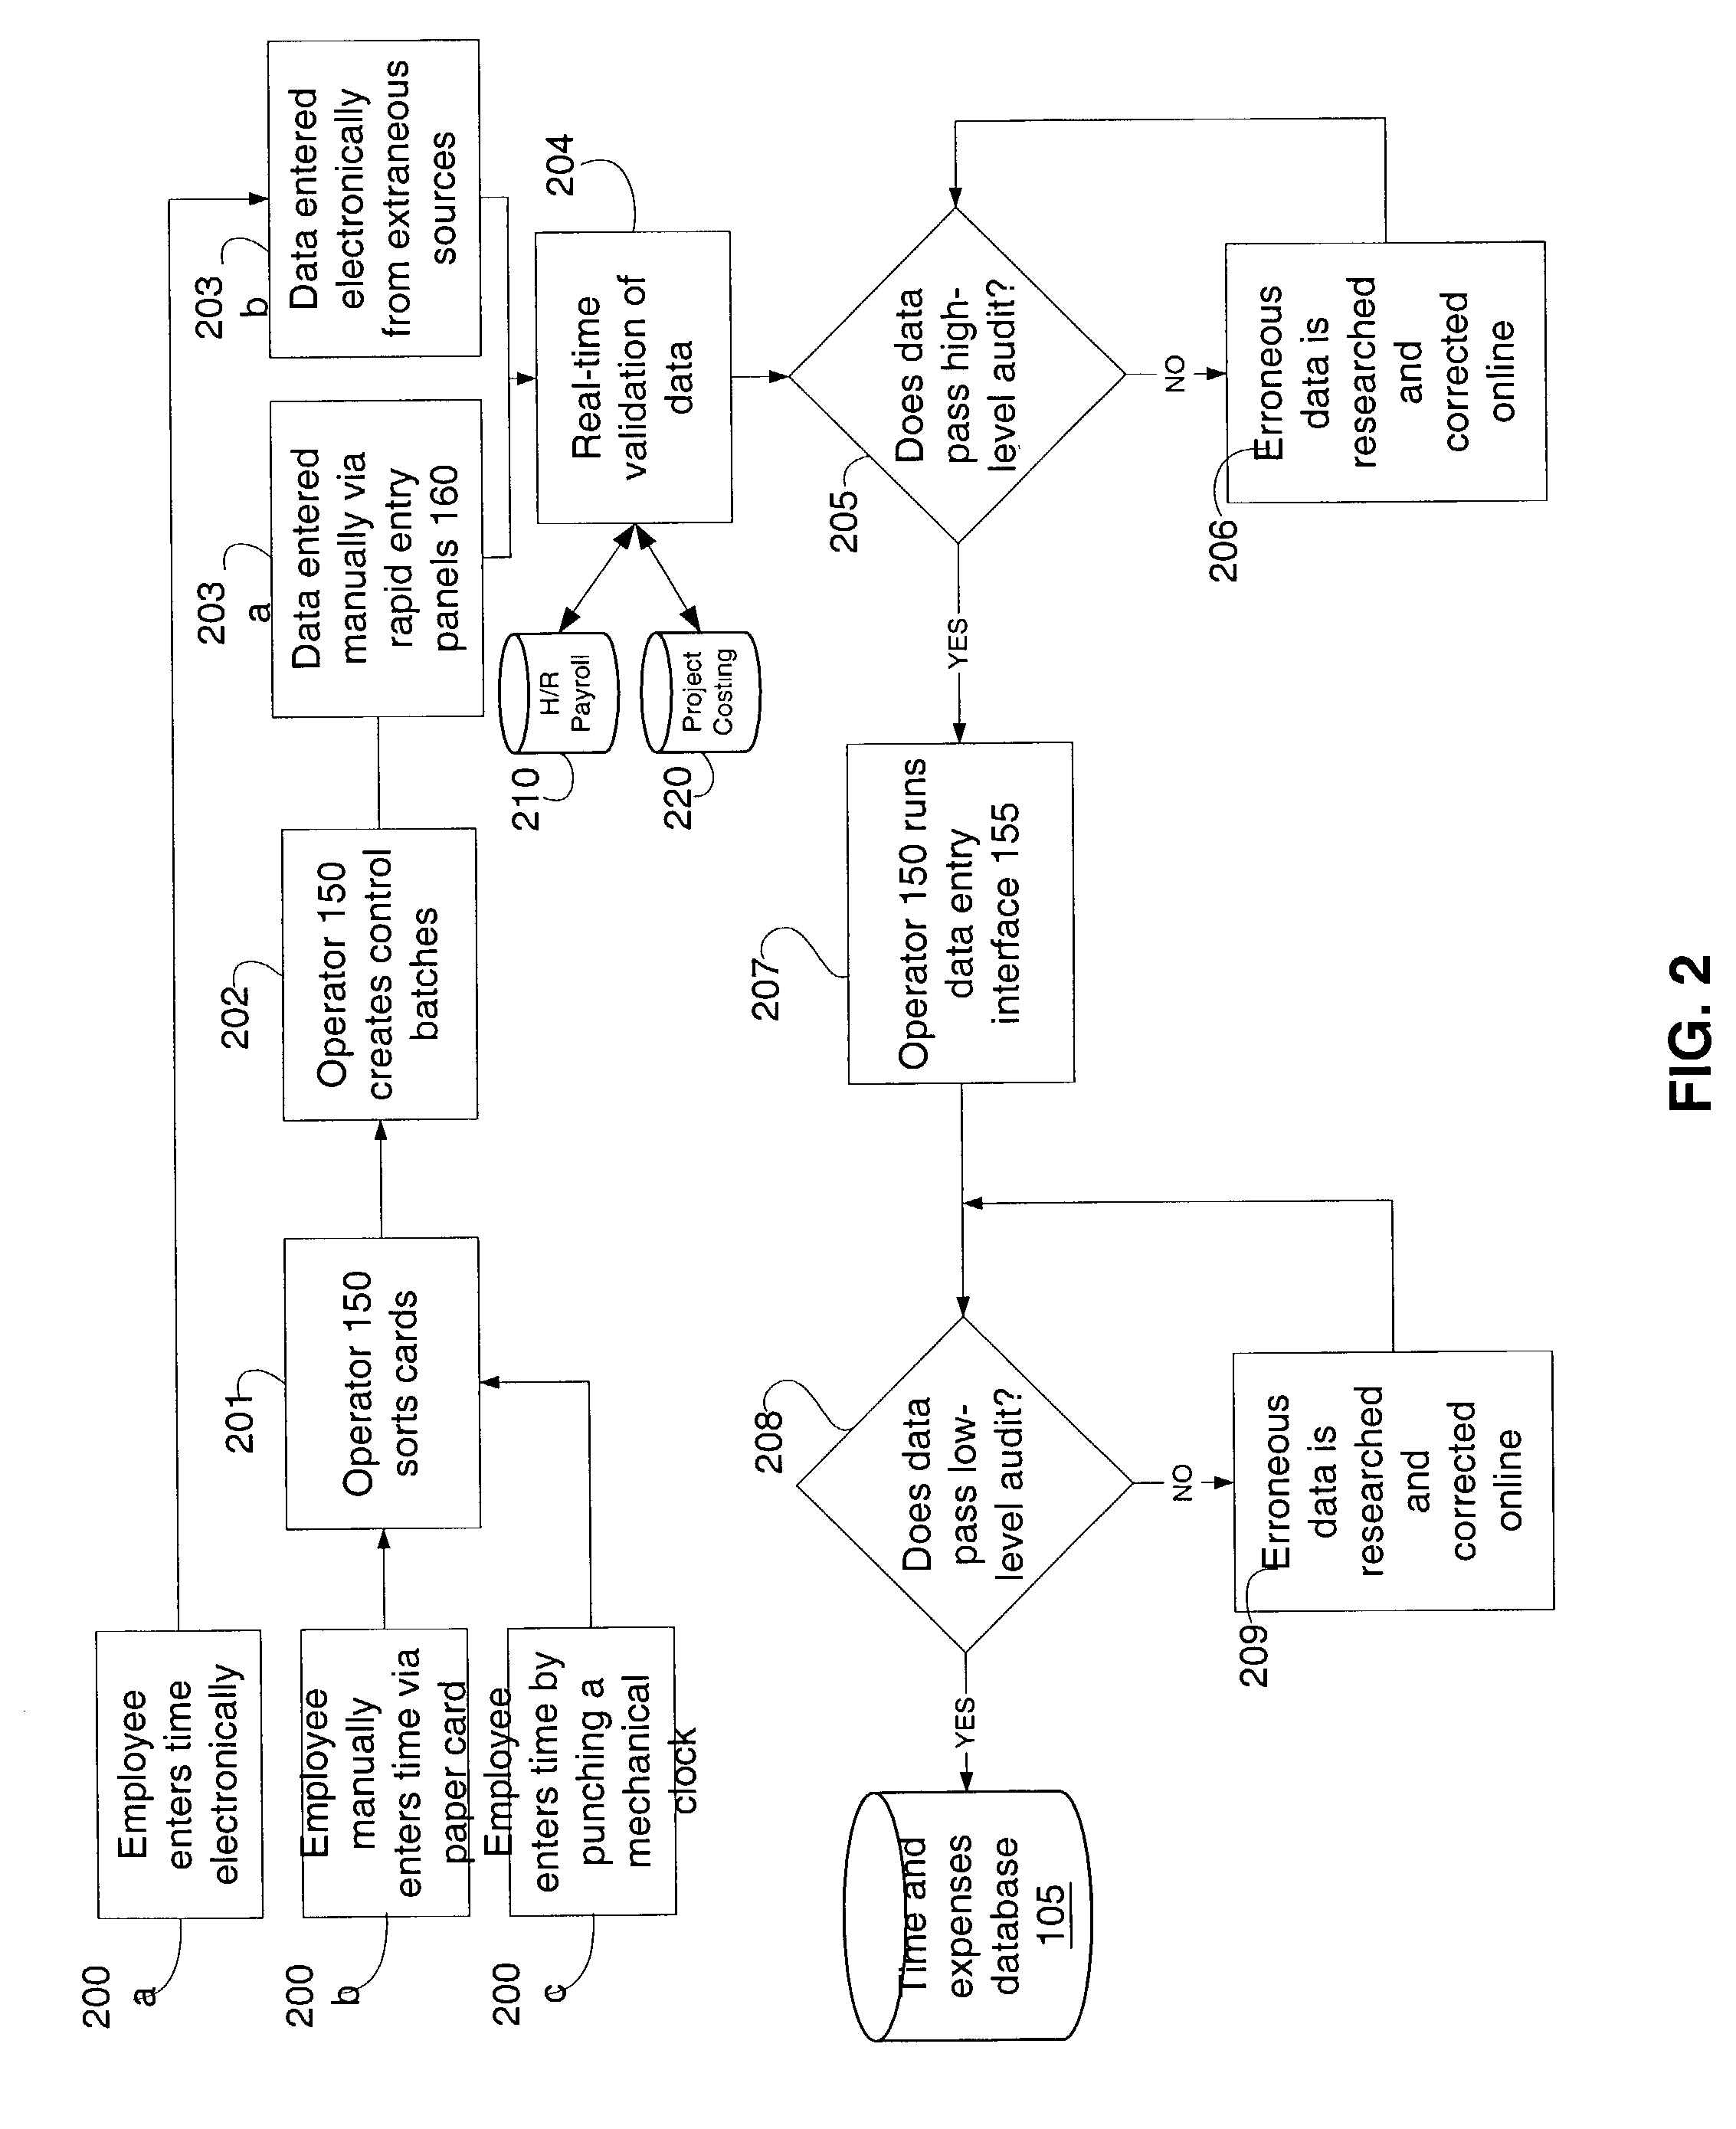 Module for the interconnectivity of independent software applications